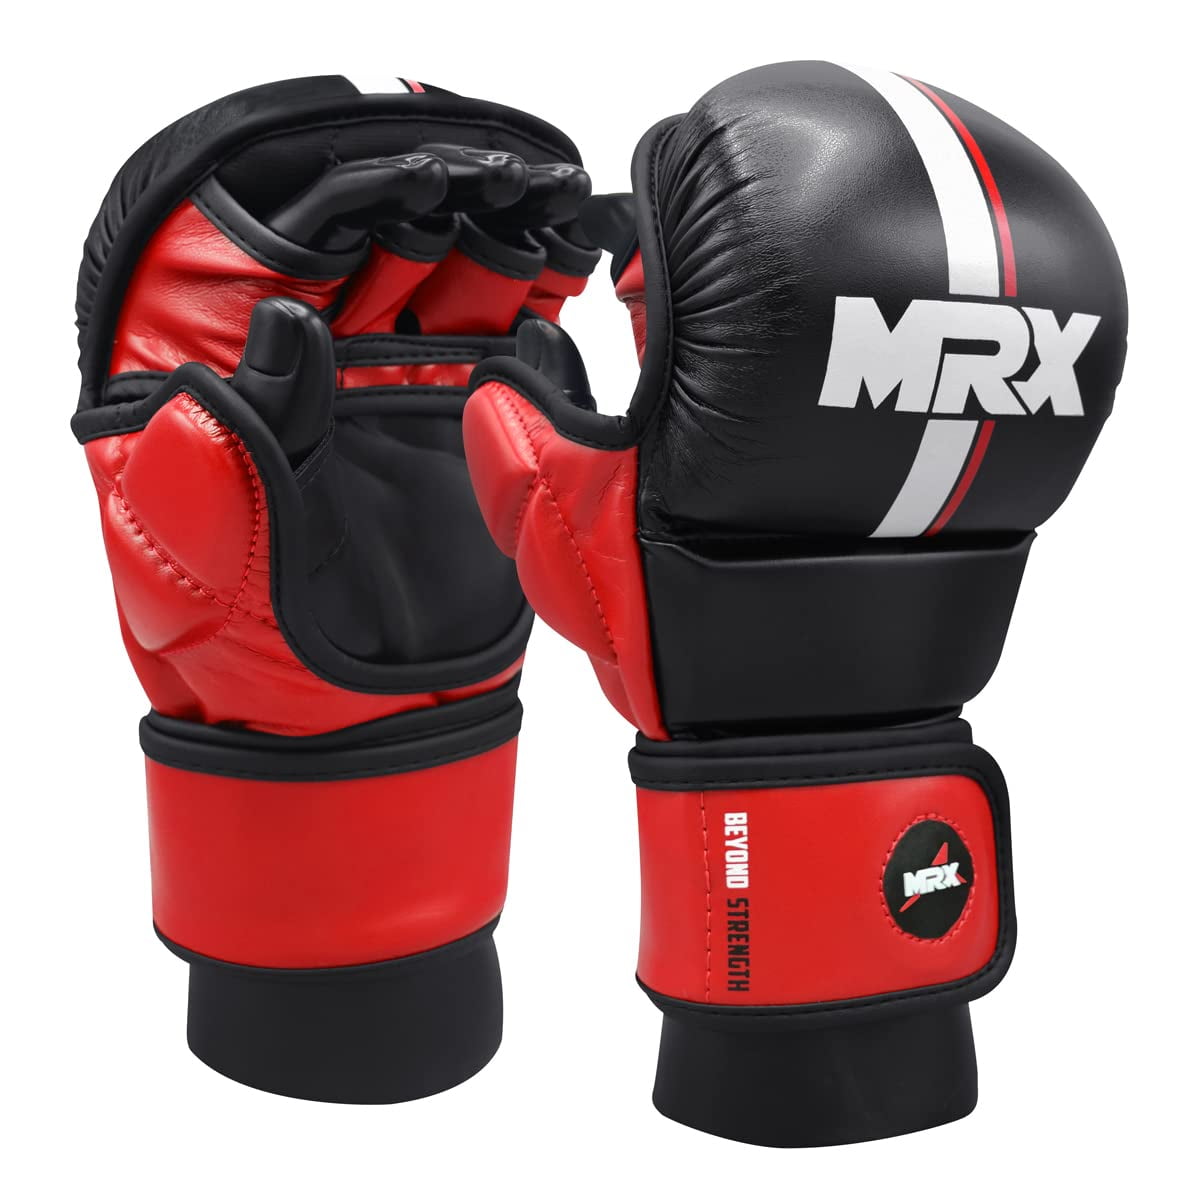 Boxing Gloves Training Sparring Punch Bag Kickboxing Fighting Cage Muay Thai 